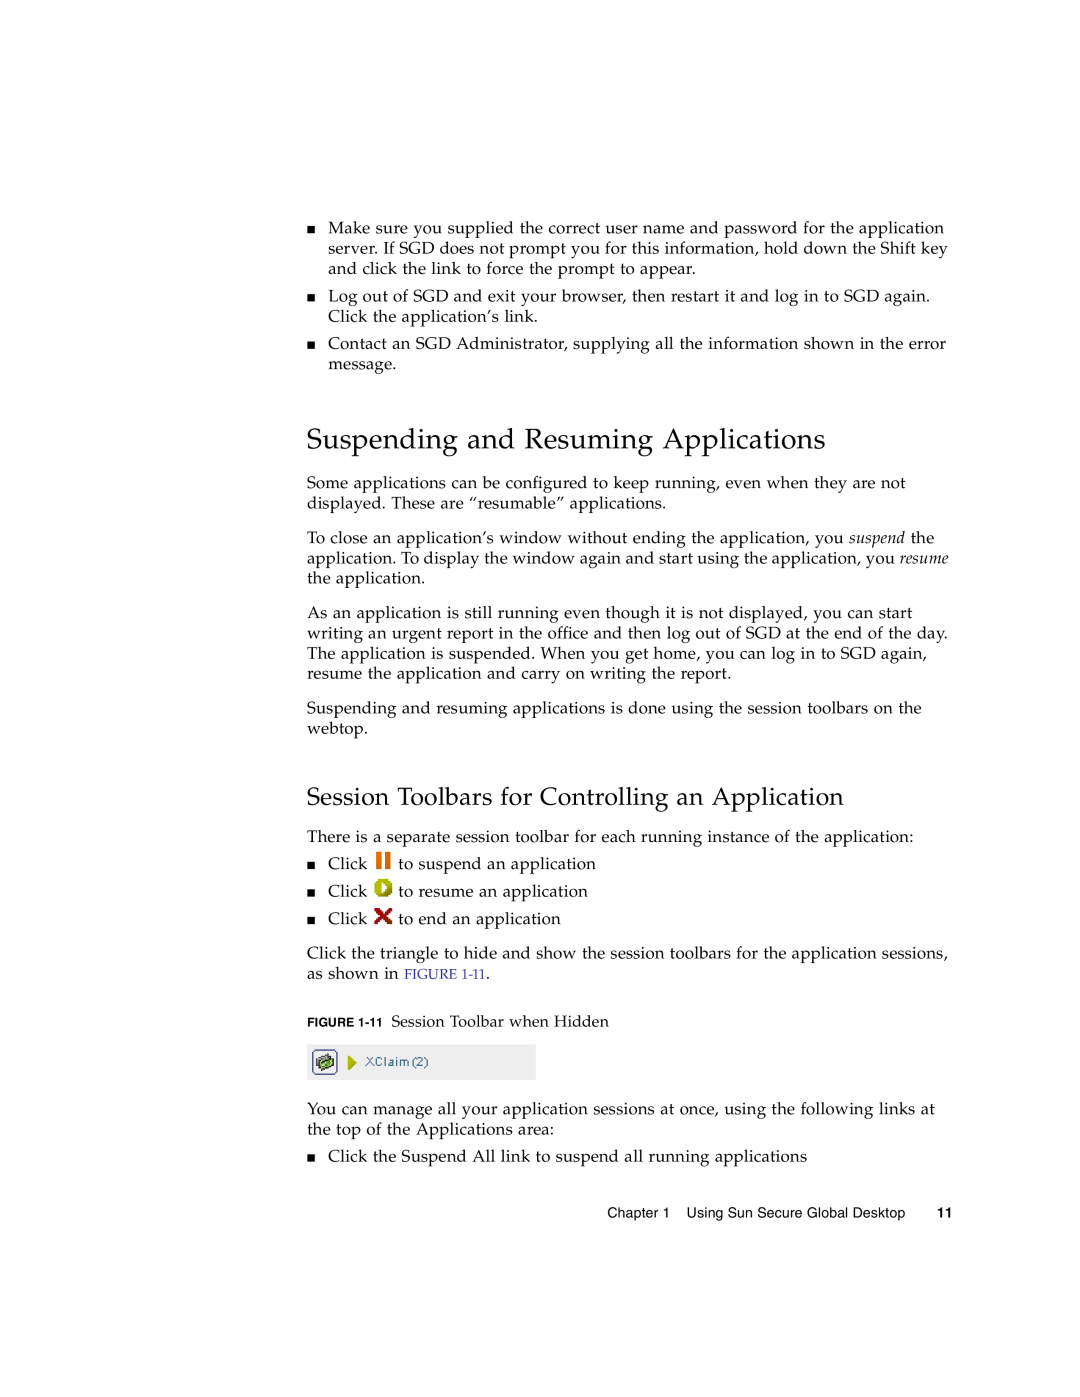 Sun Microsystems 4.5 manual Suspending and Resuming Applications, Session Toolbars for Controlling an Application 